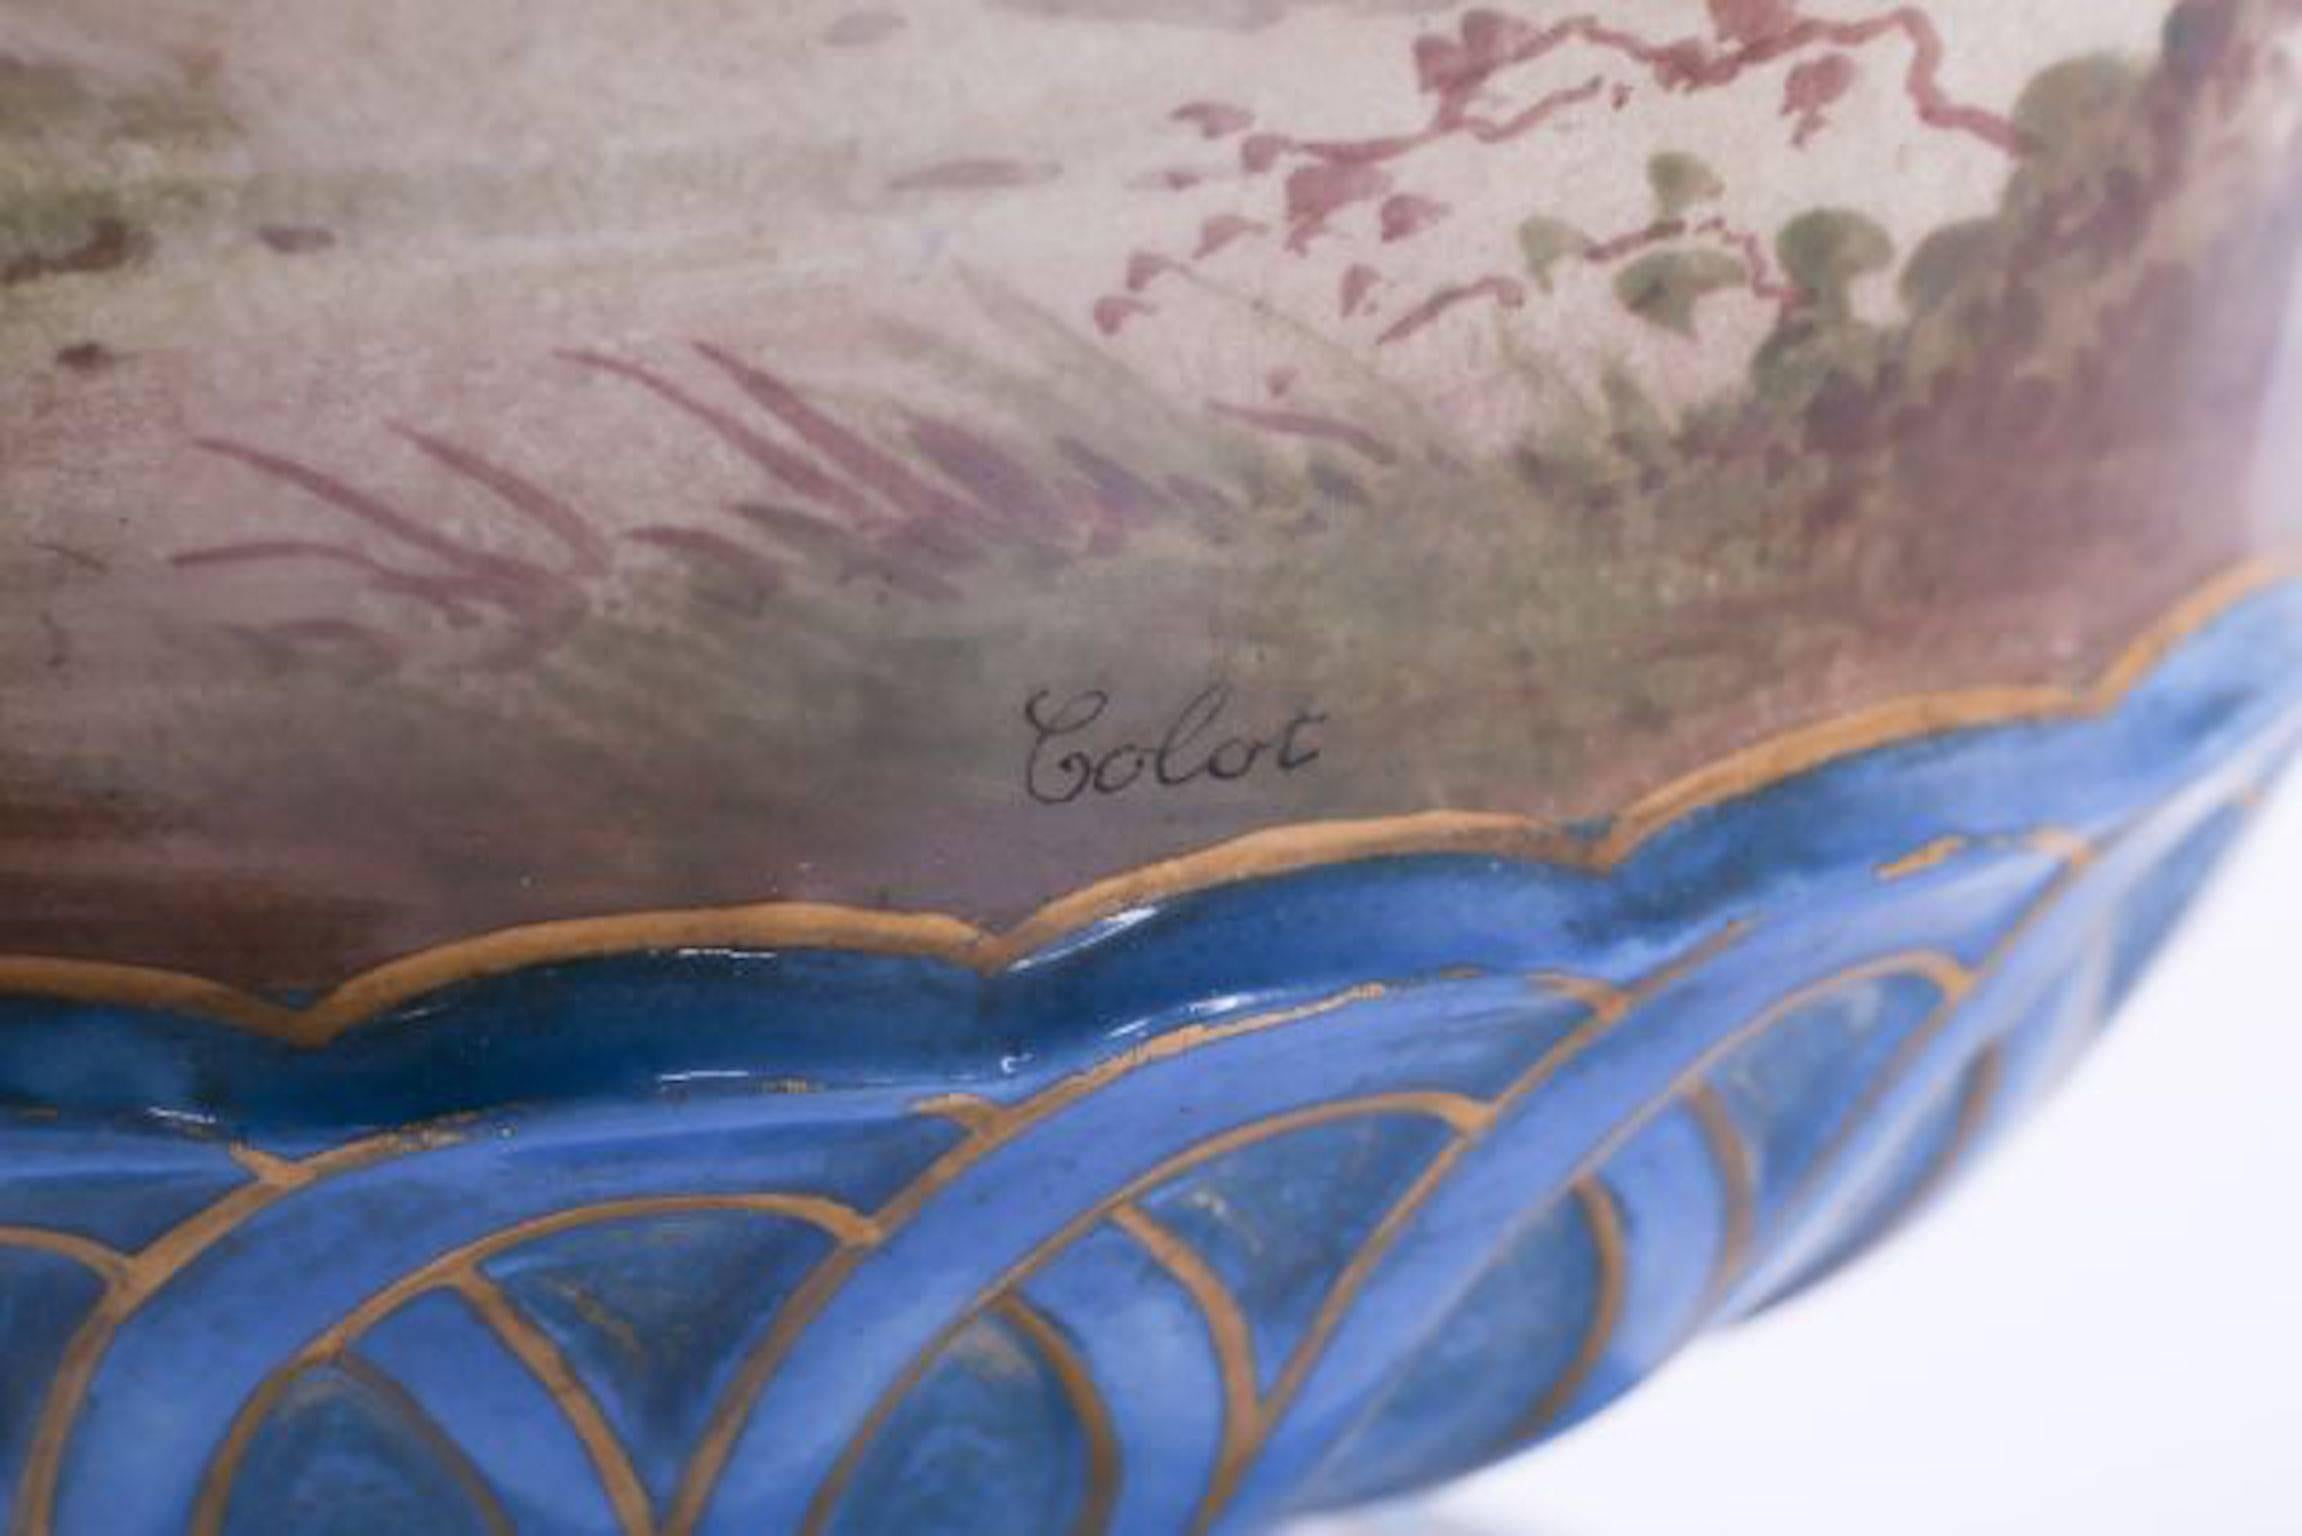 19th Century Large Sevres Porcelain Vase In Good Condition For Sale In Washington Crossing, PA